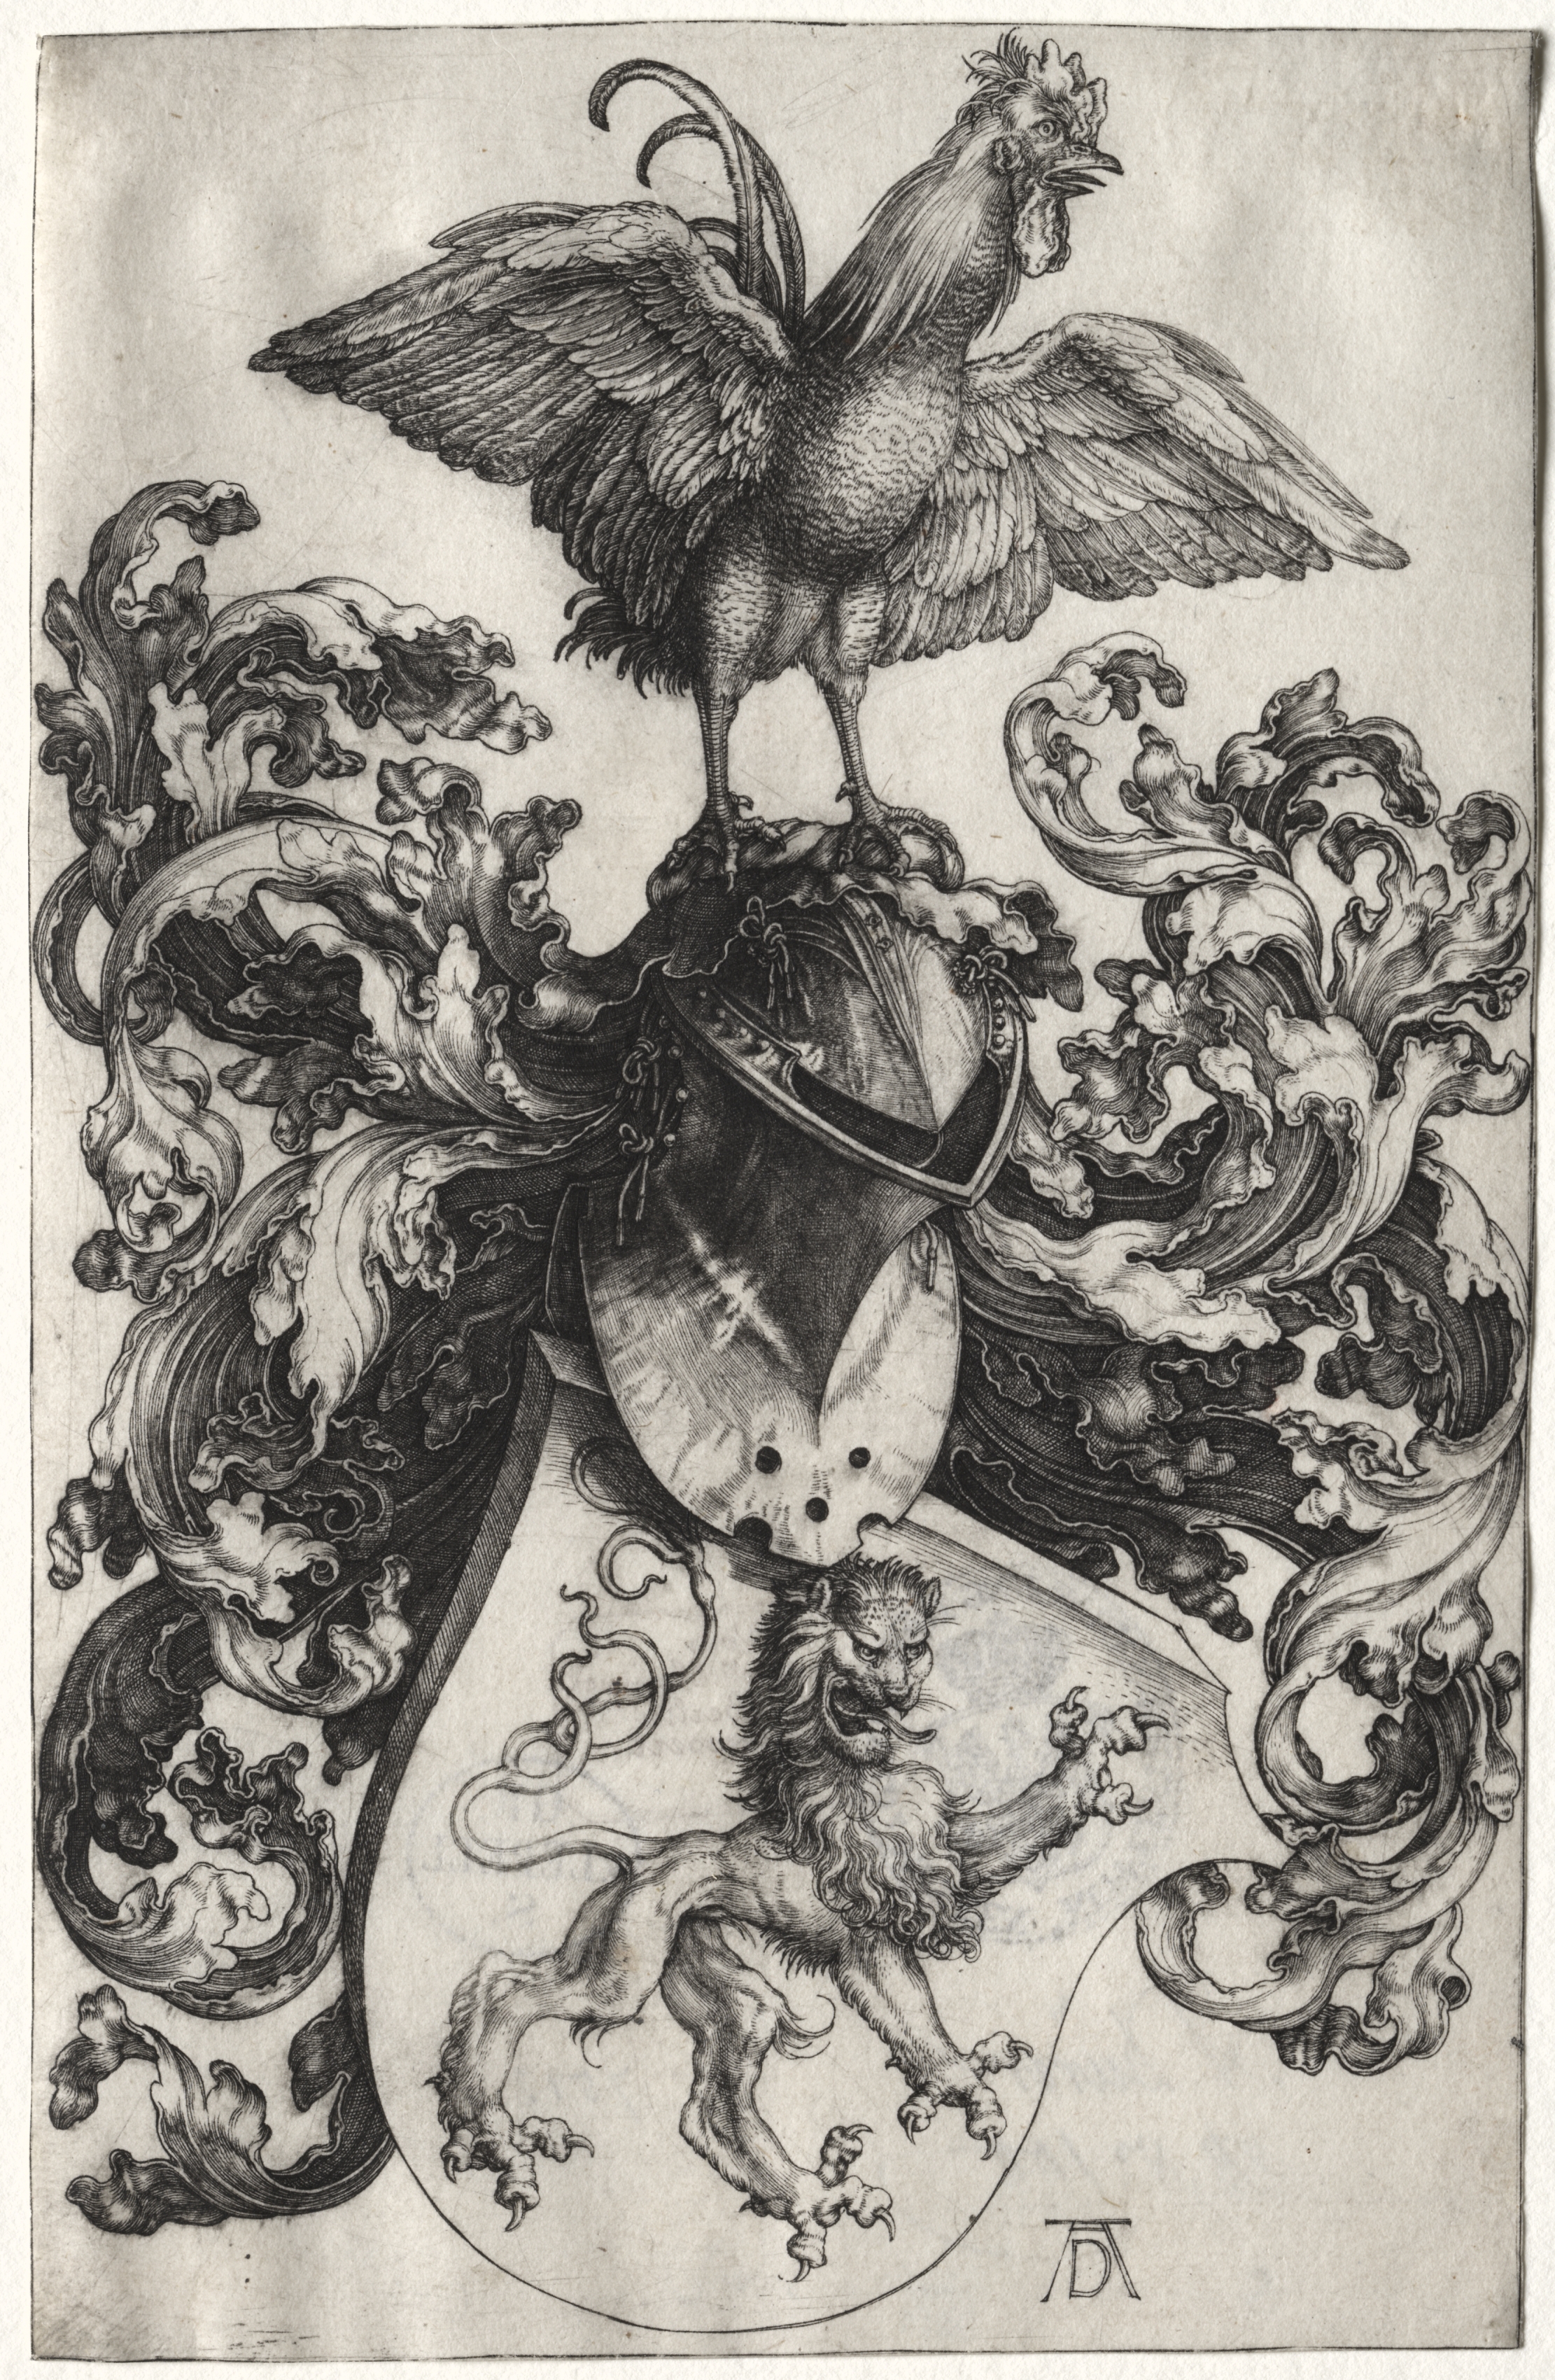 The Coat of Arms with a Lion and Cock